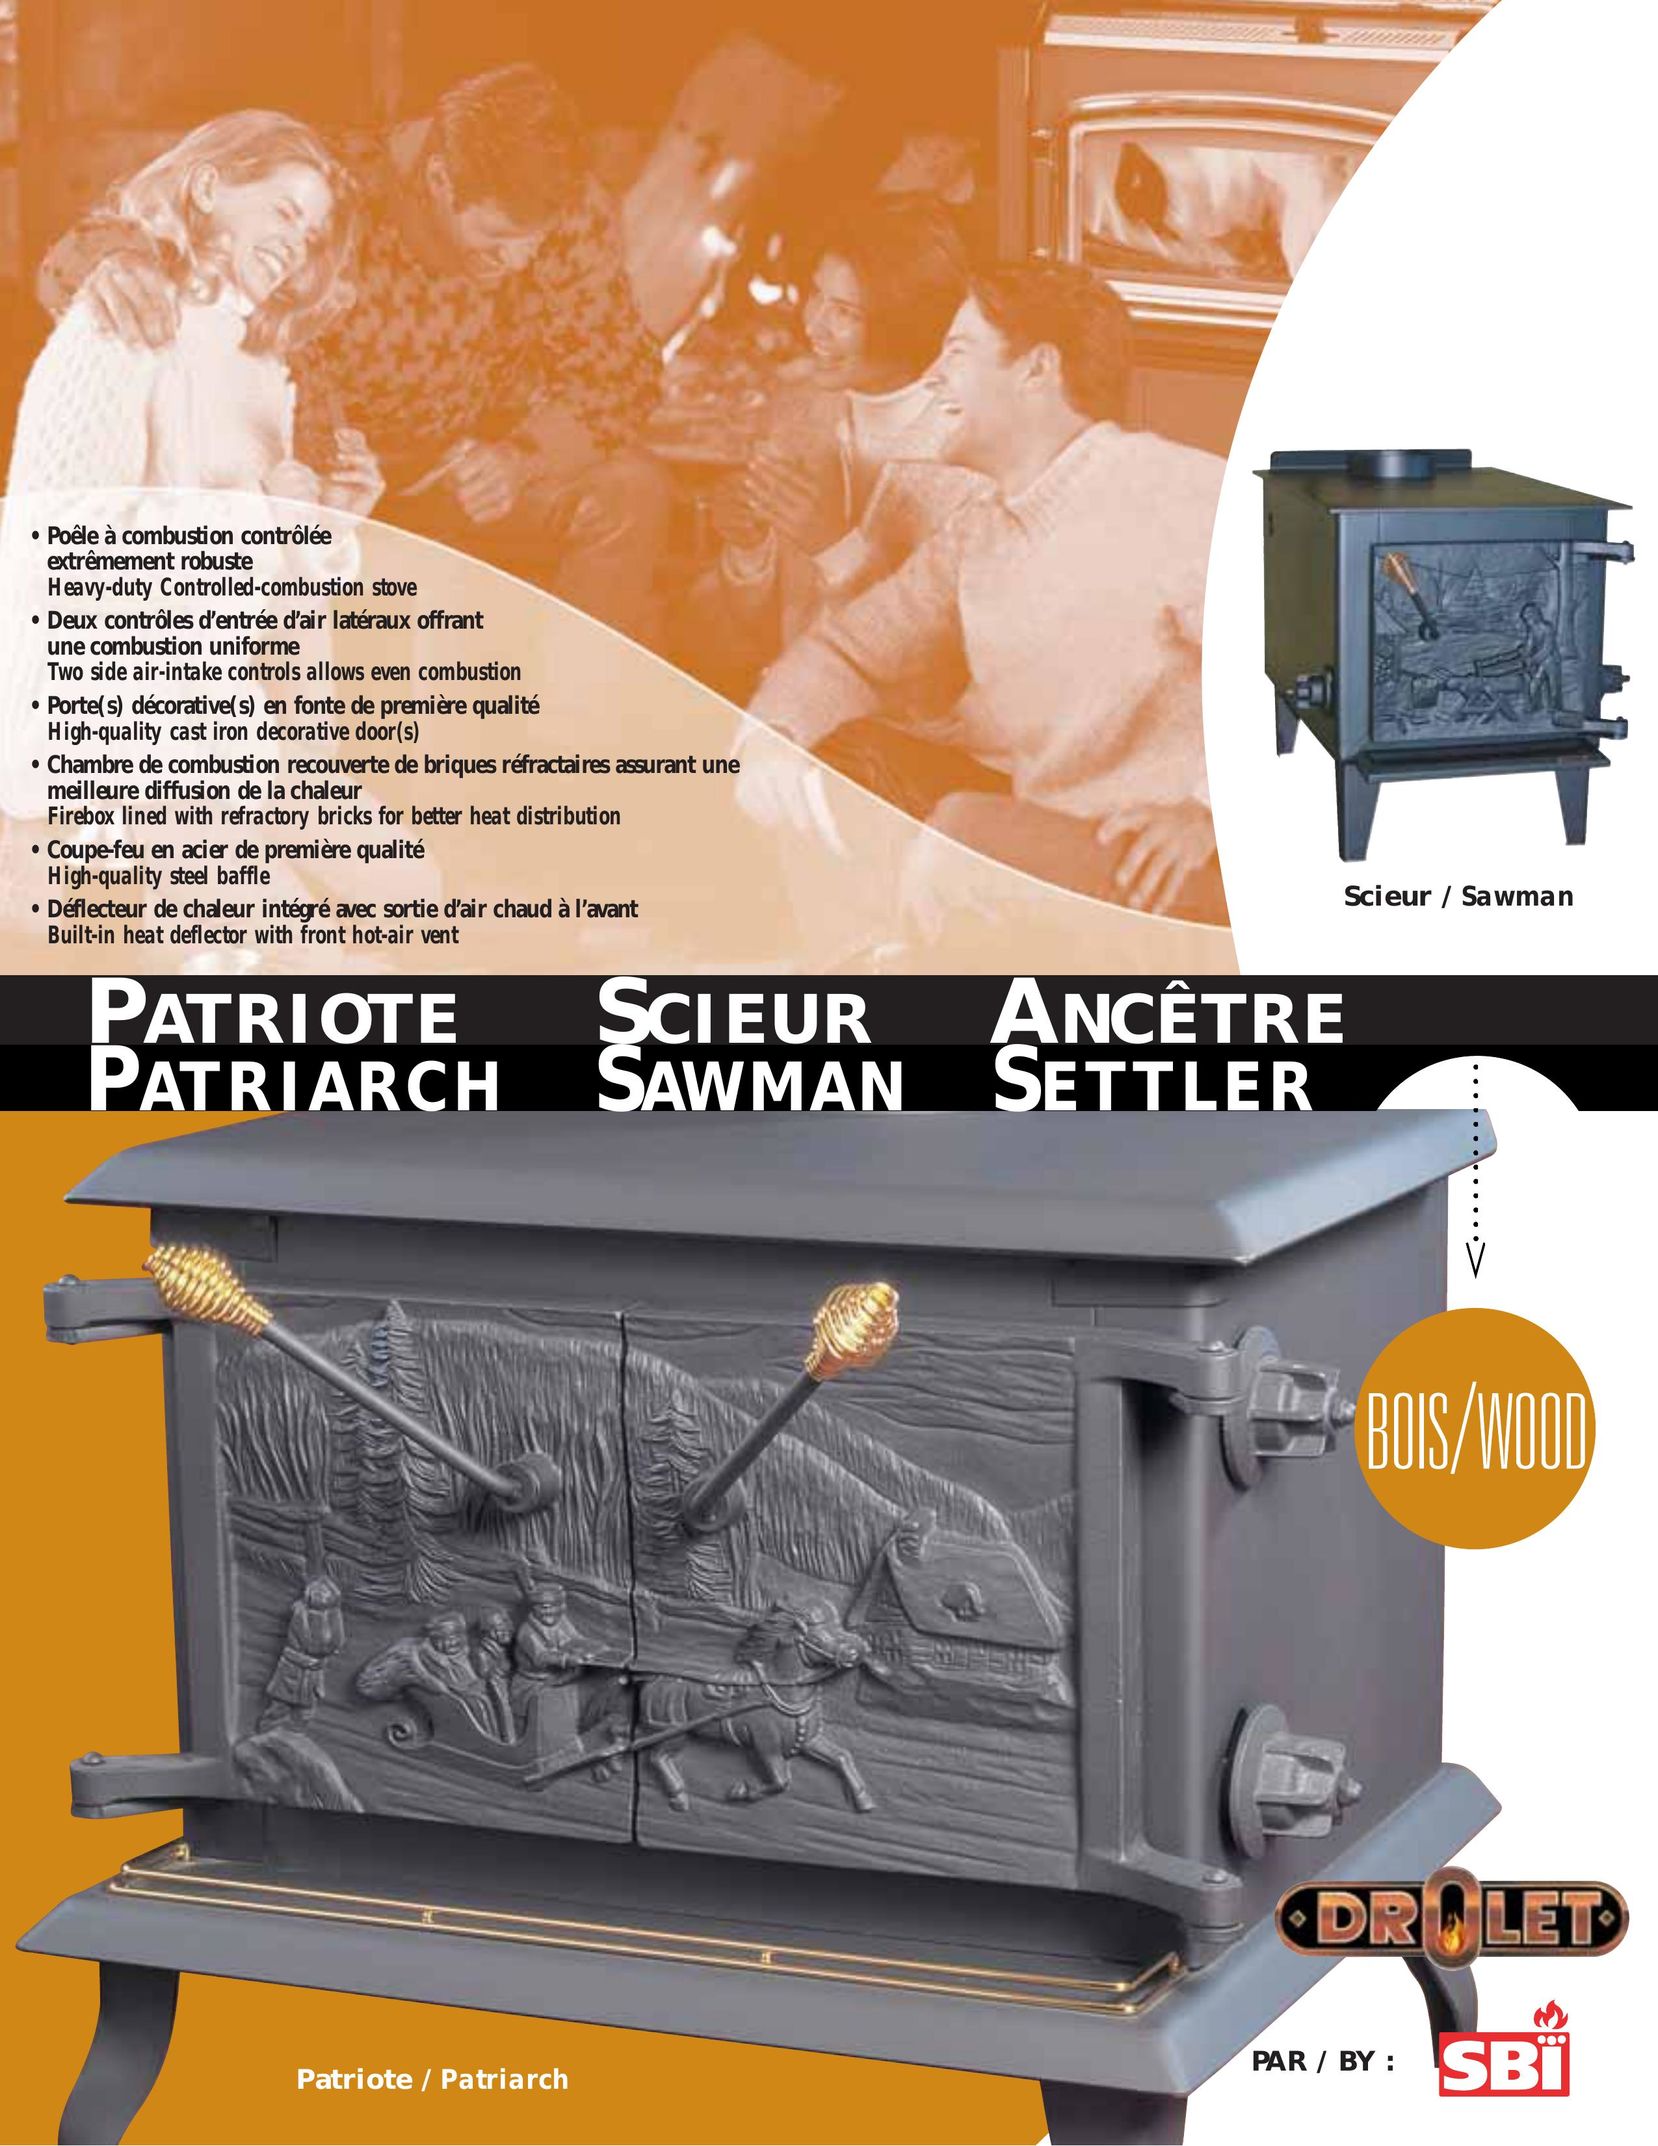 Drolet Heavy-duty Controlled-Combustion Stove Stove User Manual